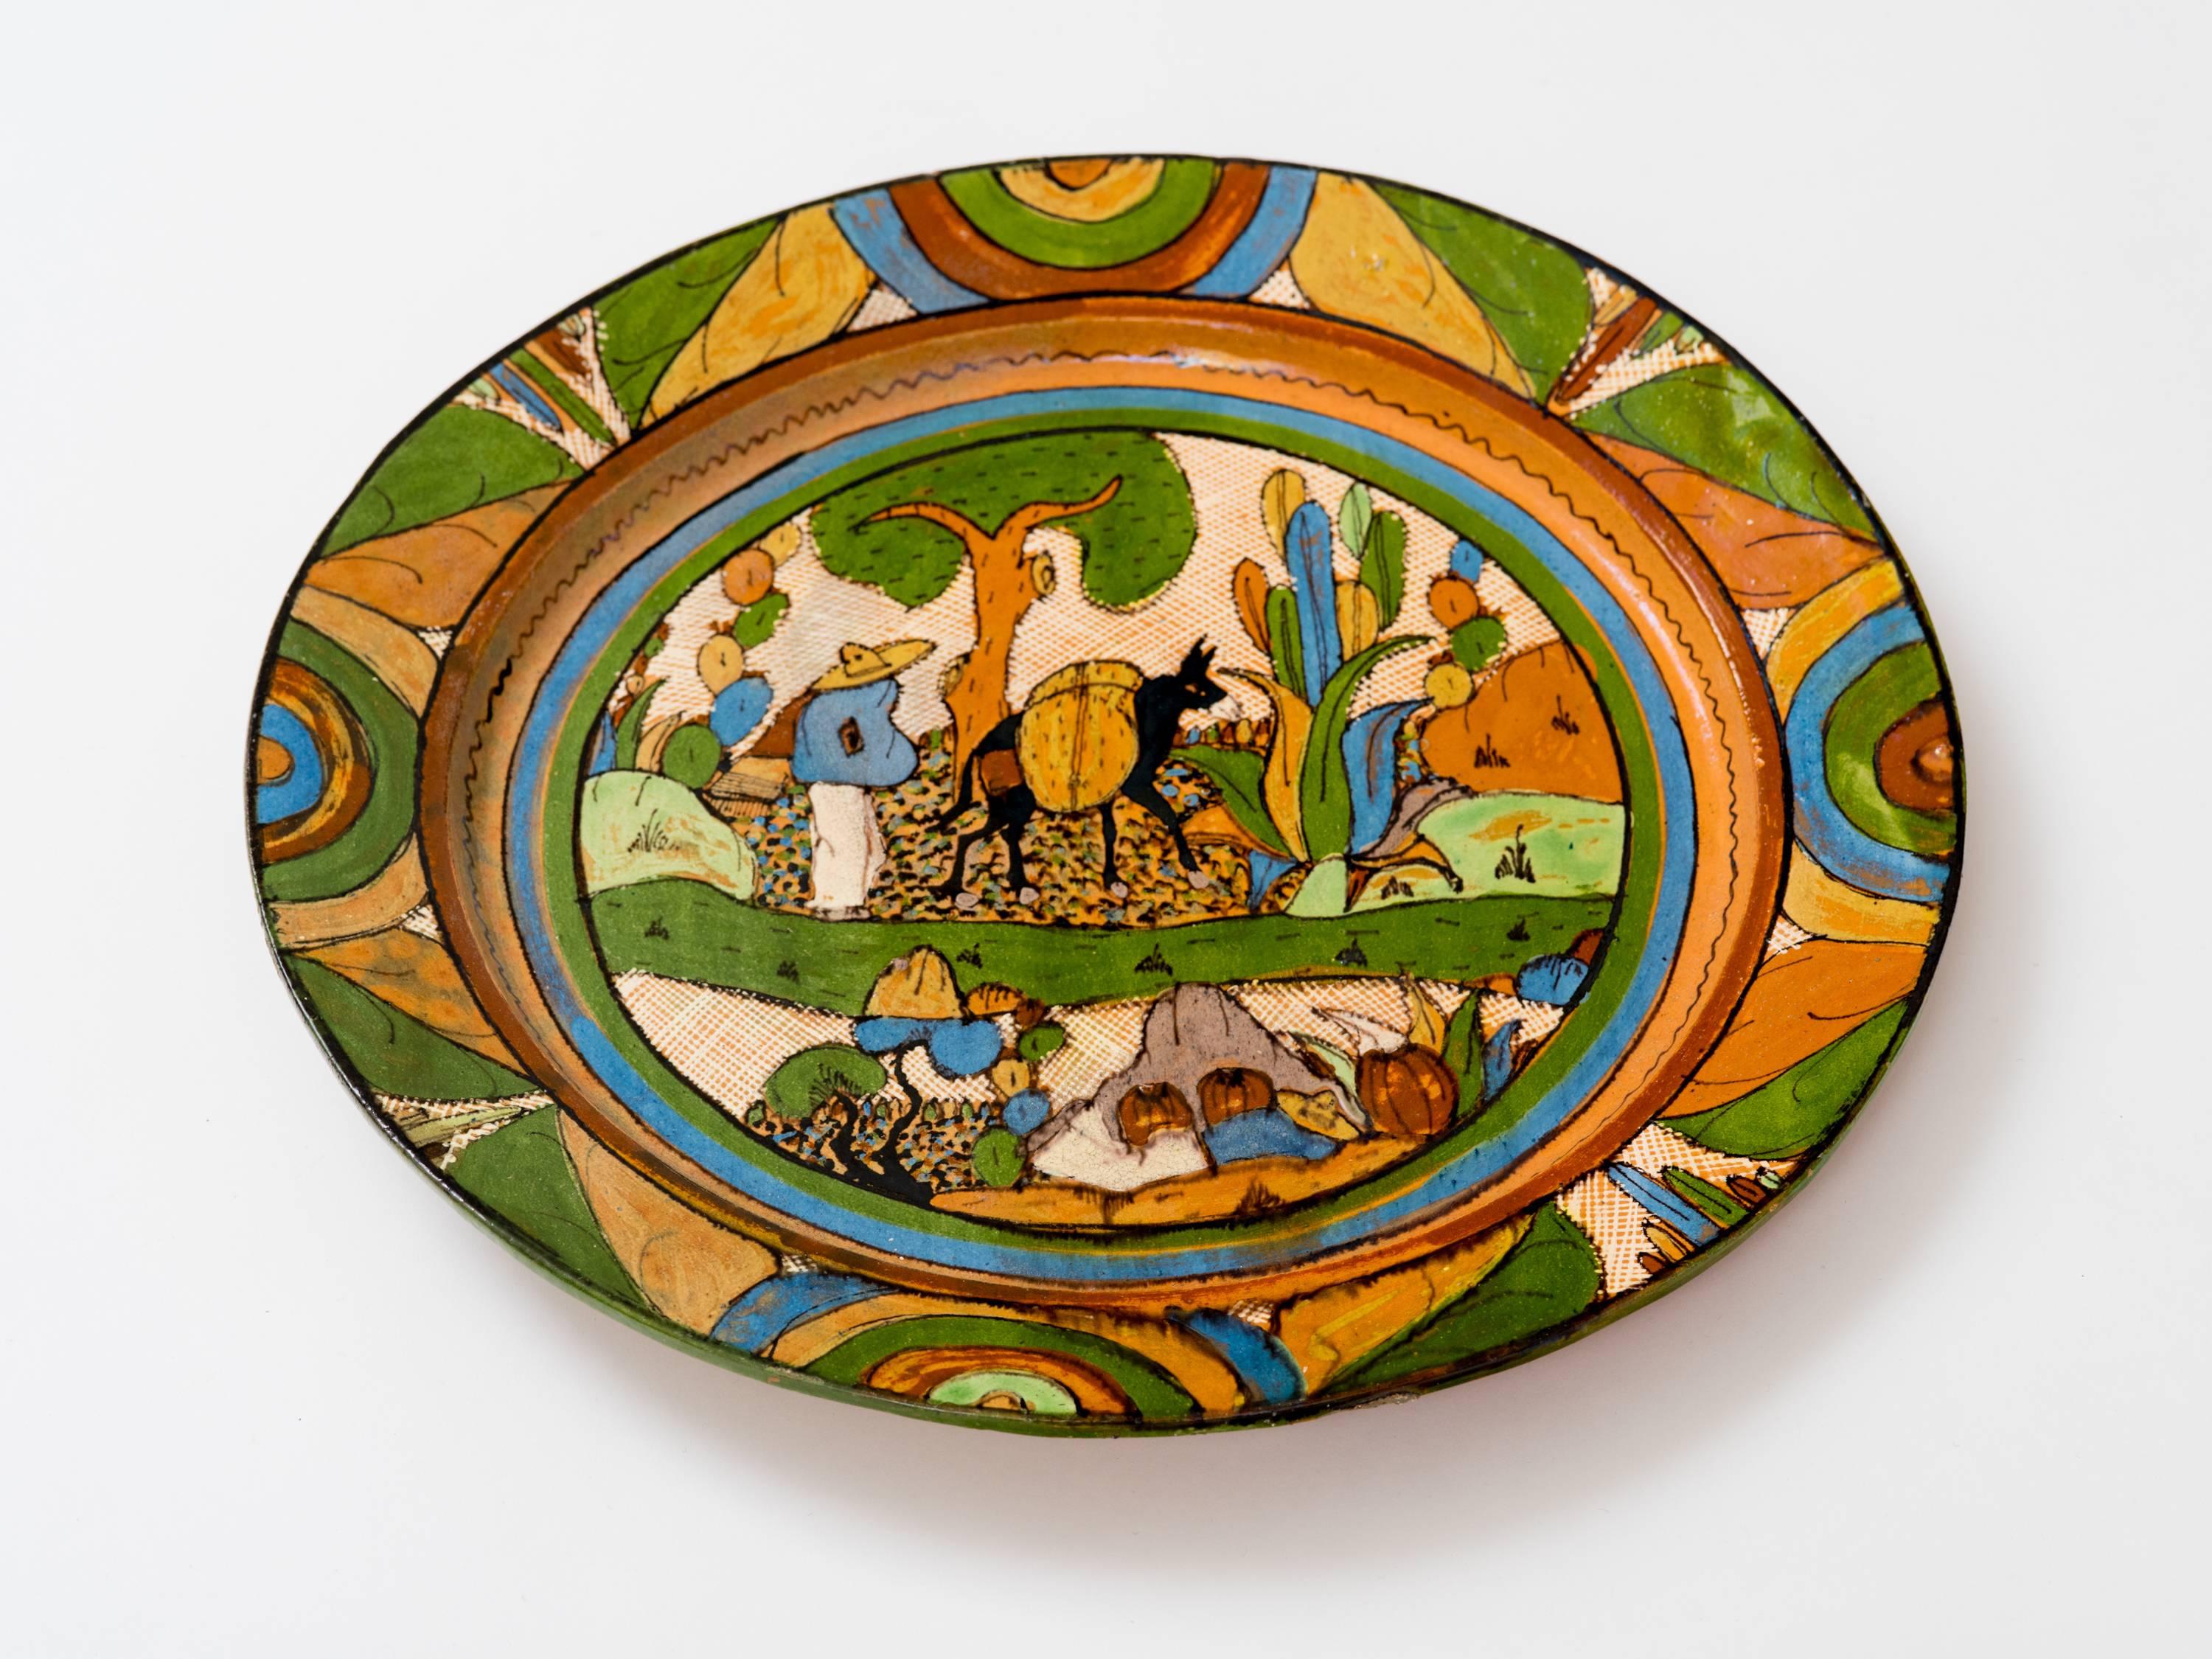 Folk Art Tlaquepaque 1930s Mexican Hand-Painted Ceramic Charger Tray